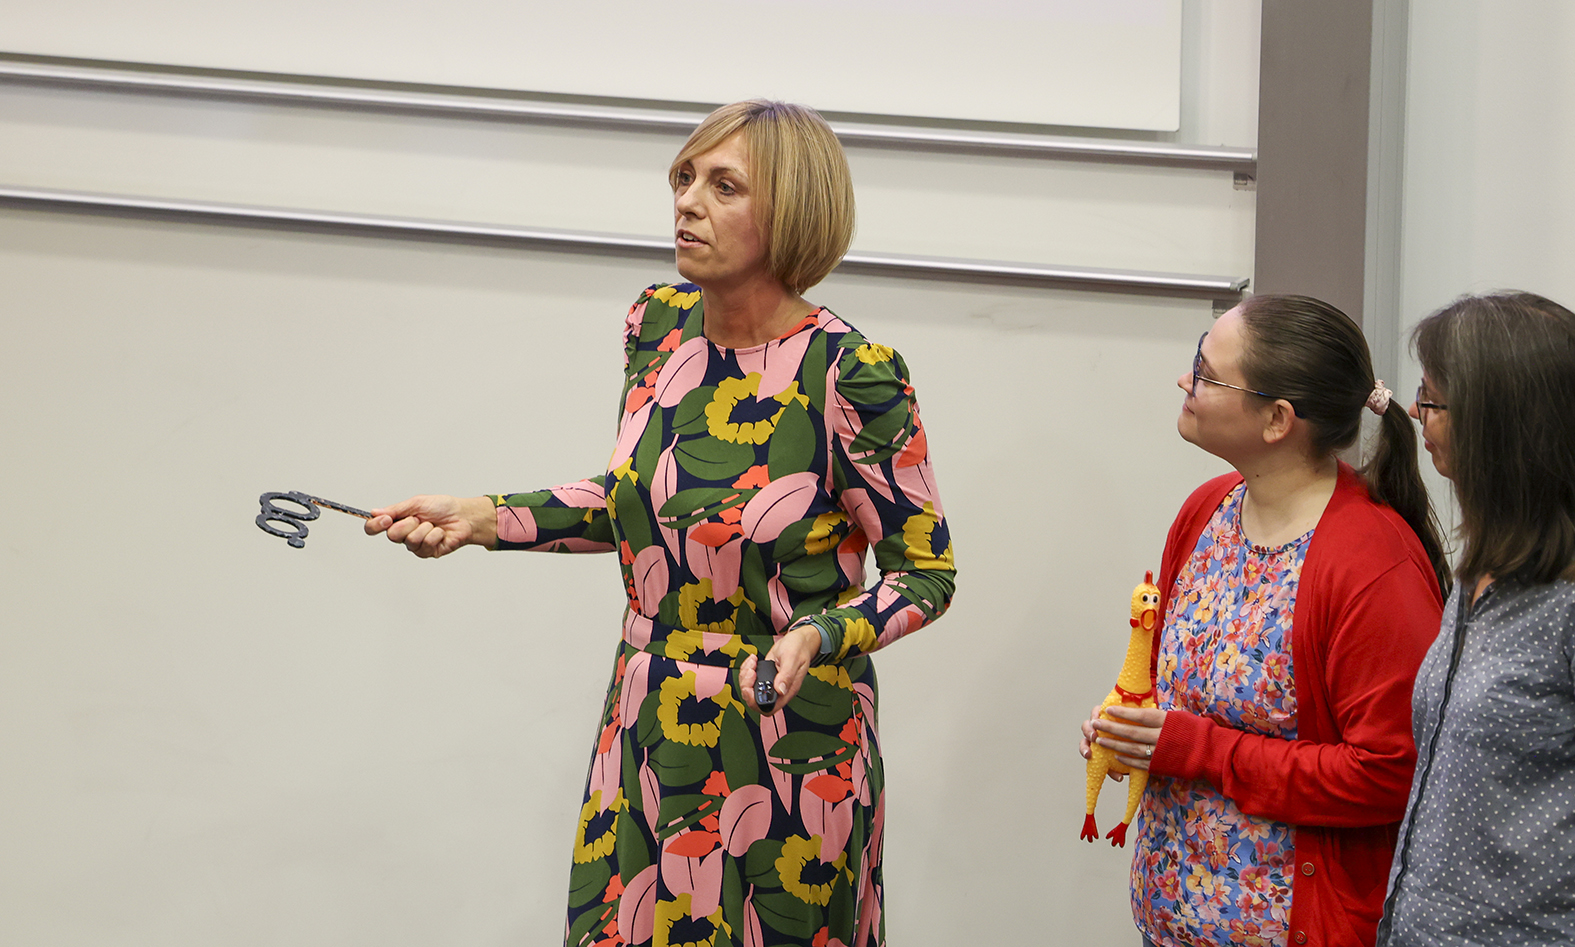 Dr Radka Newton gives her Perfect Pitch presentation while holding an opera glasses prop. Colleague Dr Jenni Carter stands watching holding a yellow rubber chicken prop.